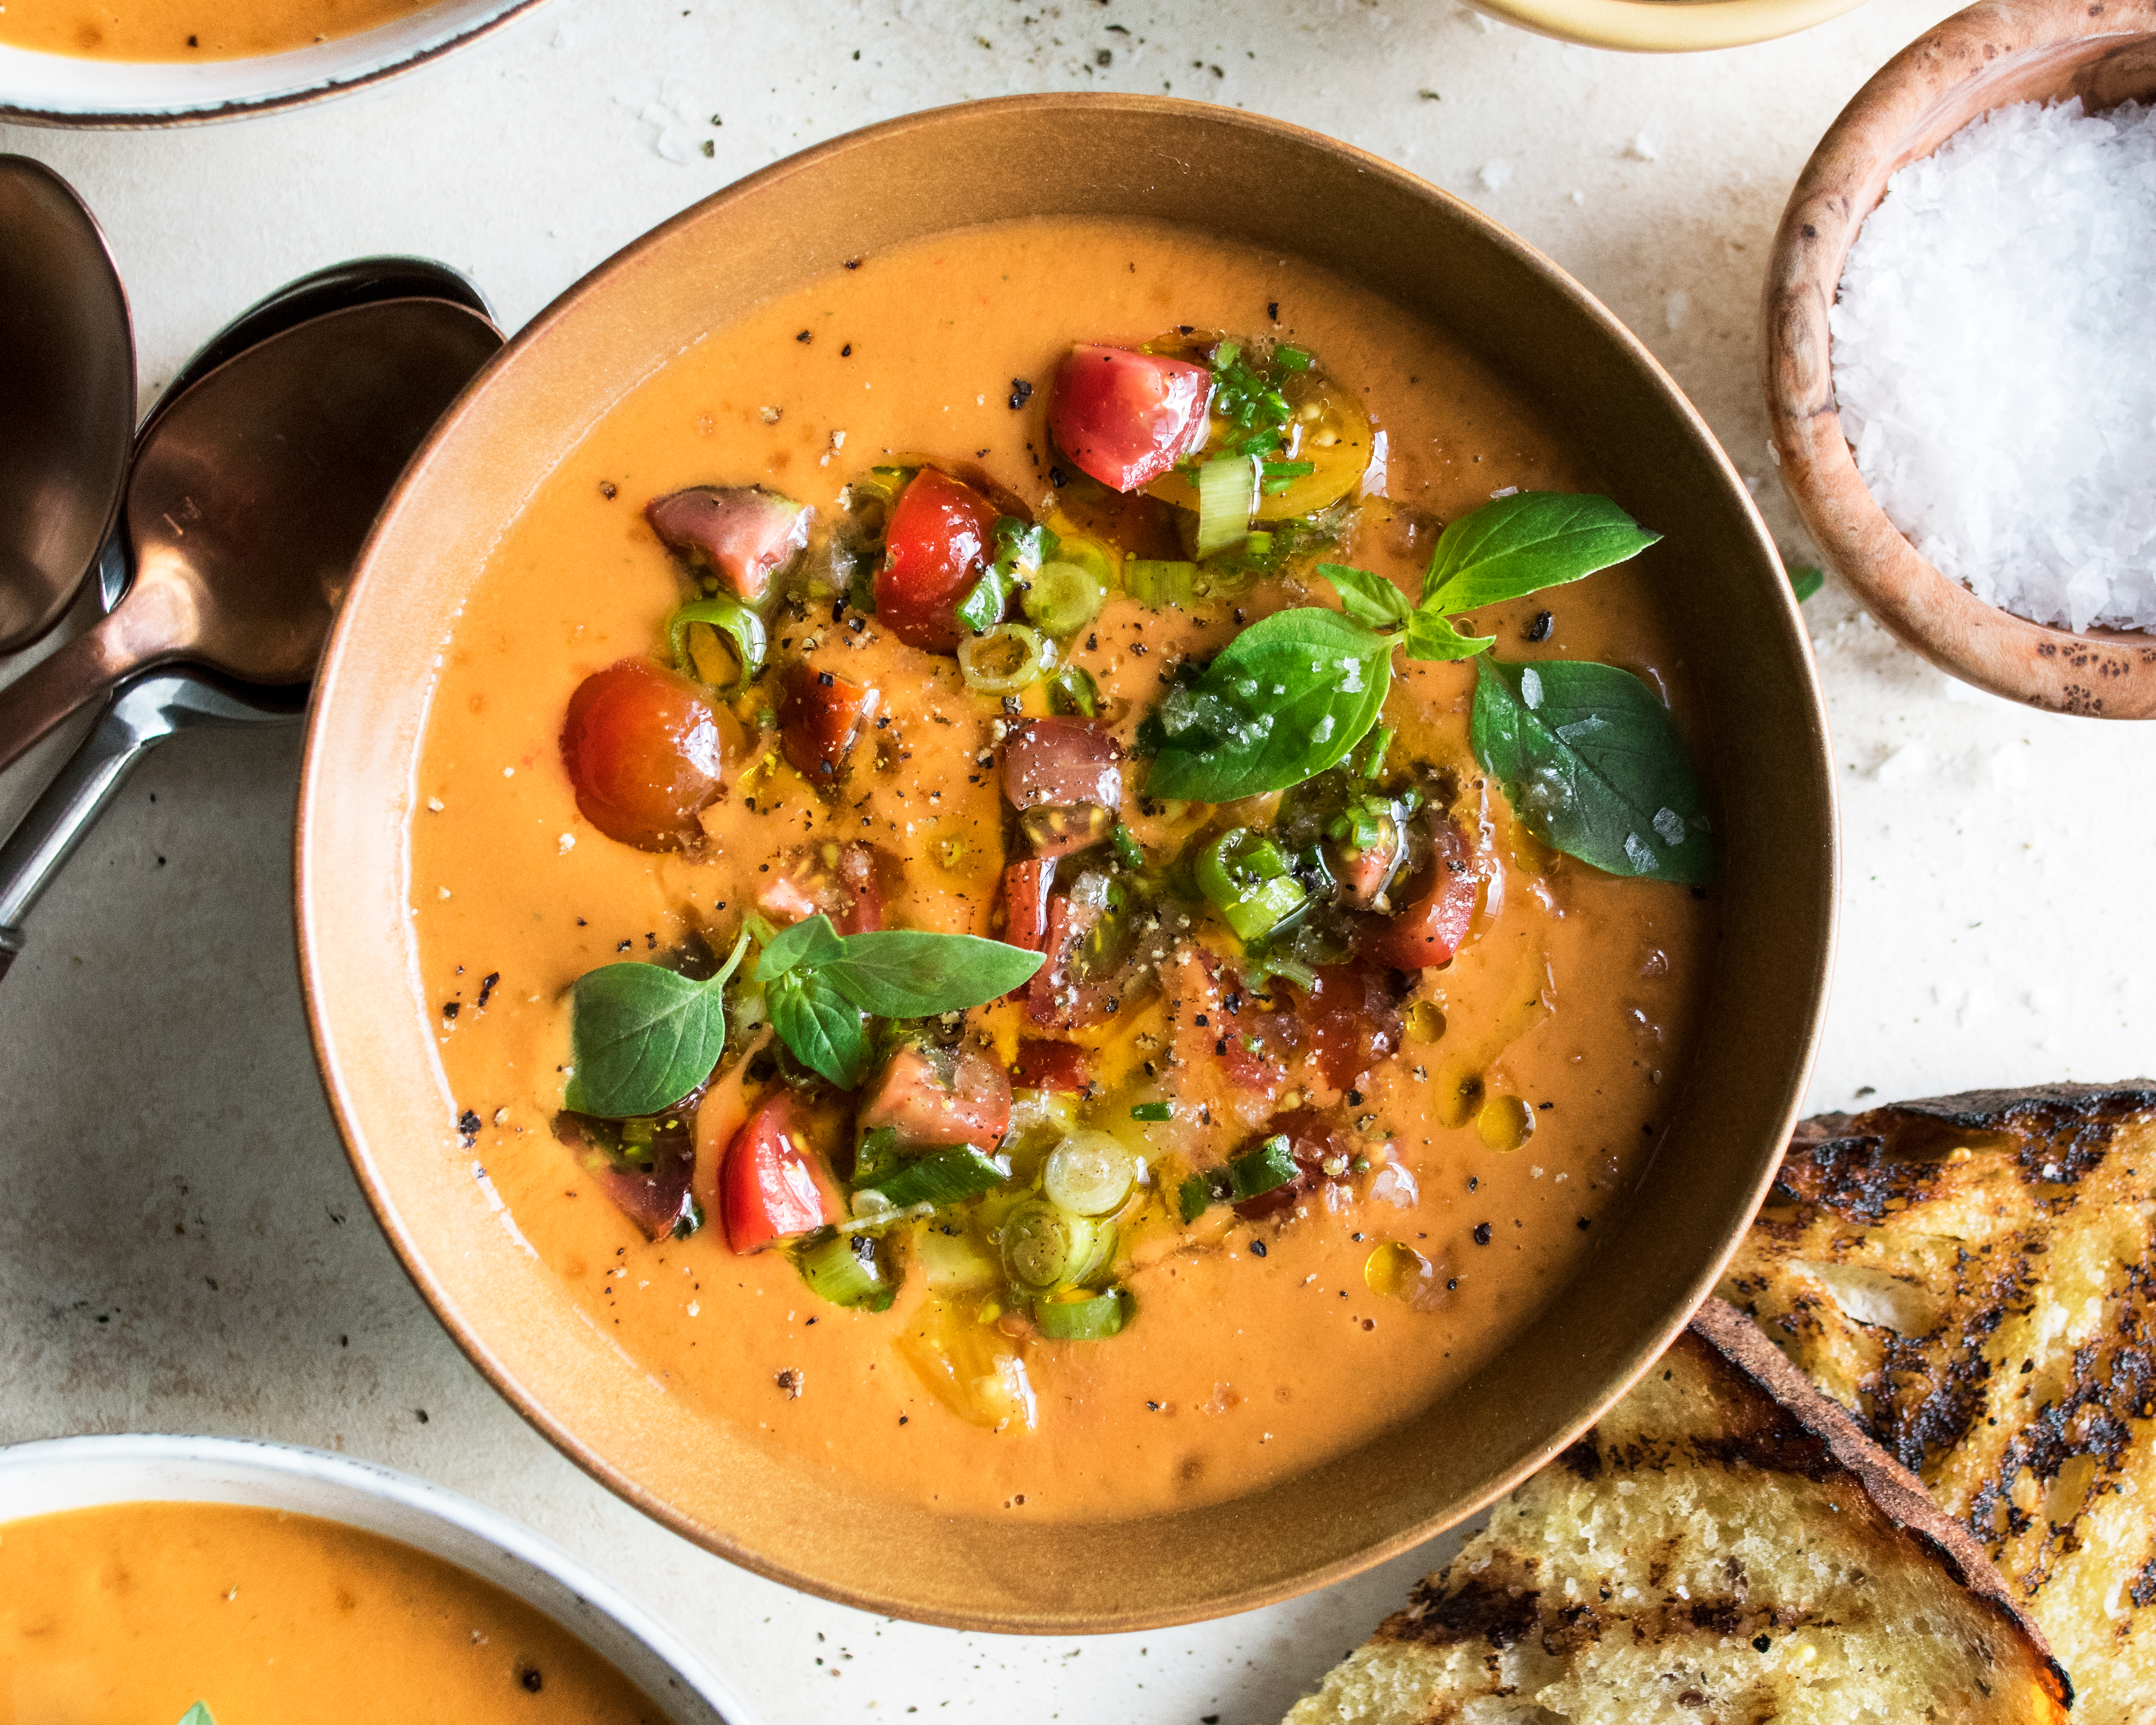 Heirloom Tomato Gazpacho with Grilled Bread - The Original Dish